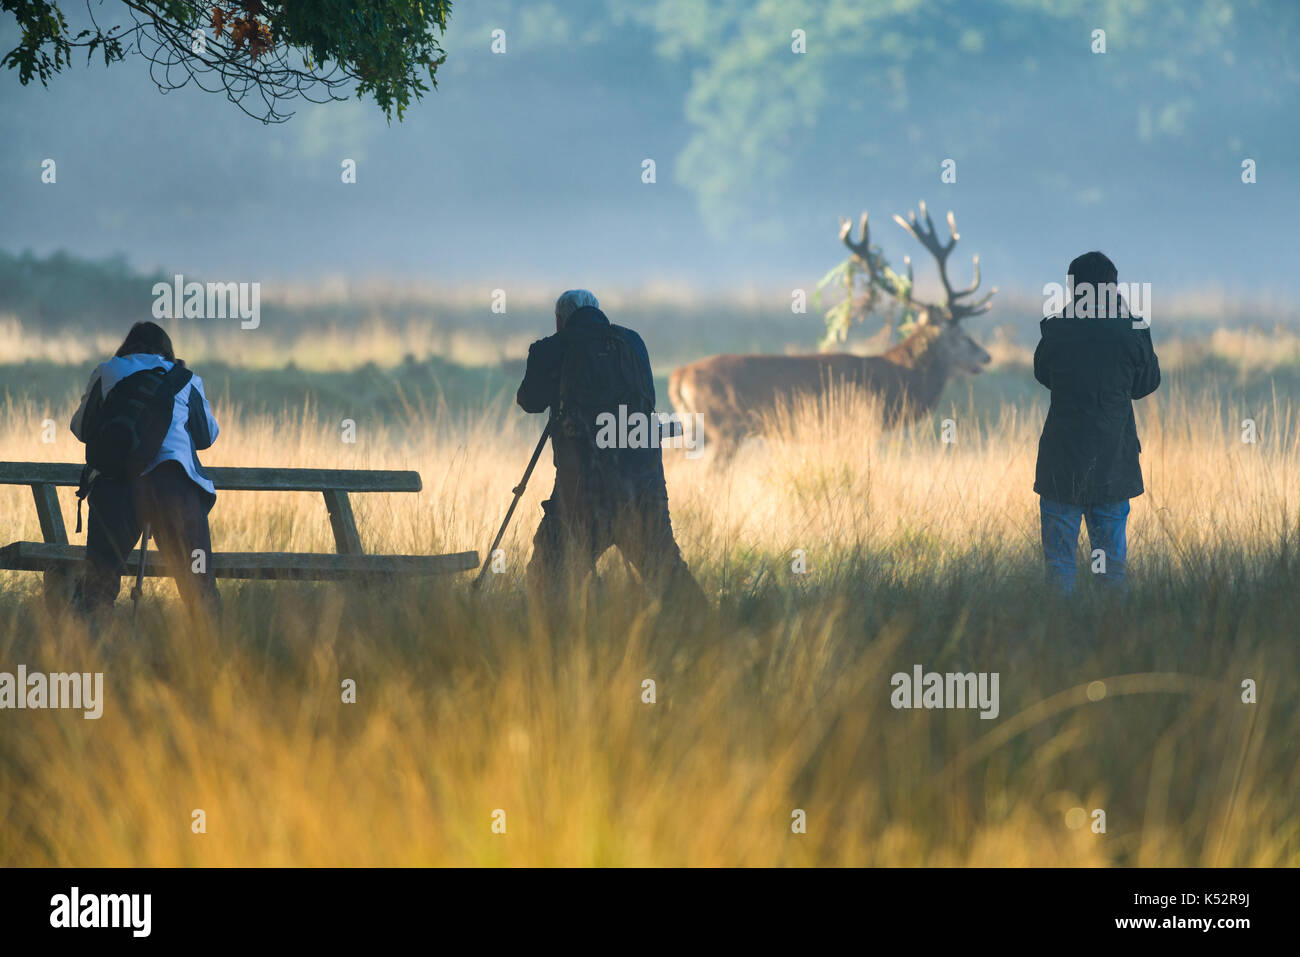 Red deer (Cervus elaphus) male stag in rutting season with photographers taking photos nearby, United Kingdom Stock Photo